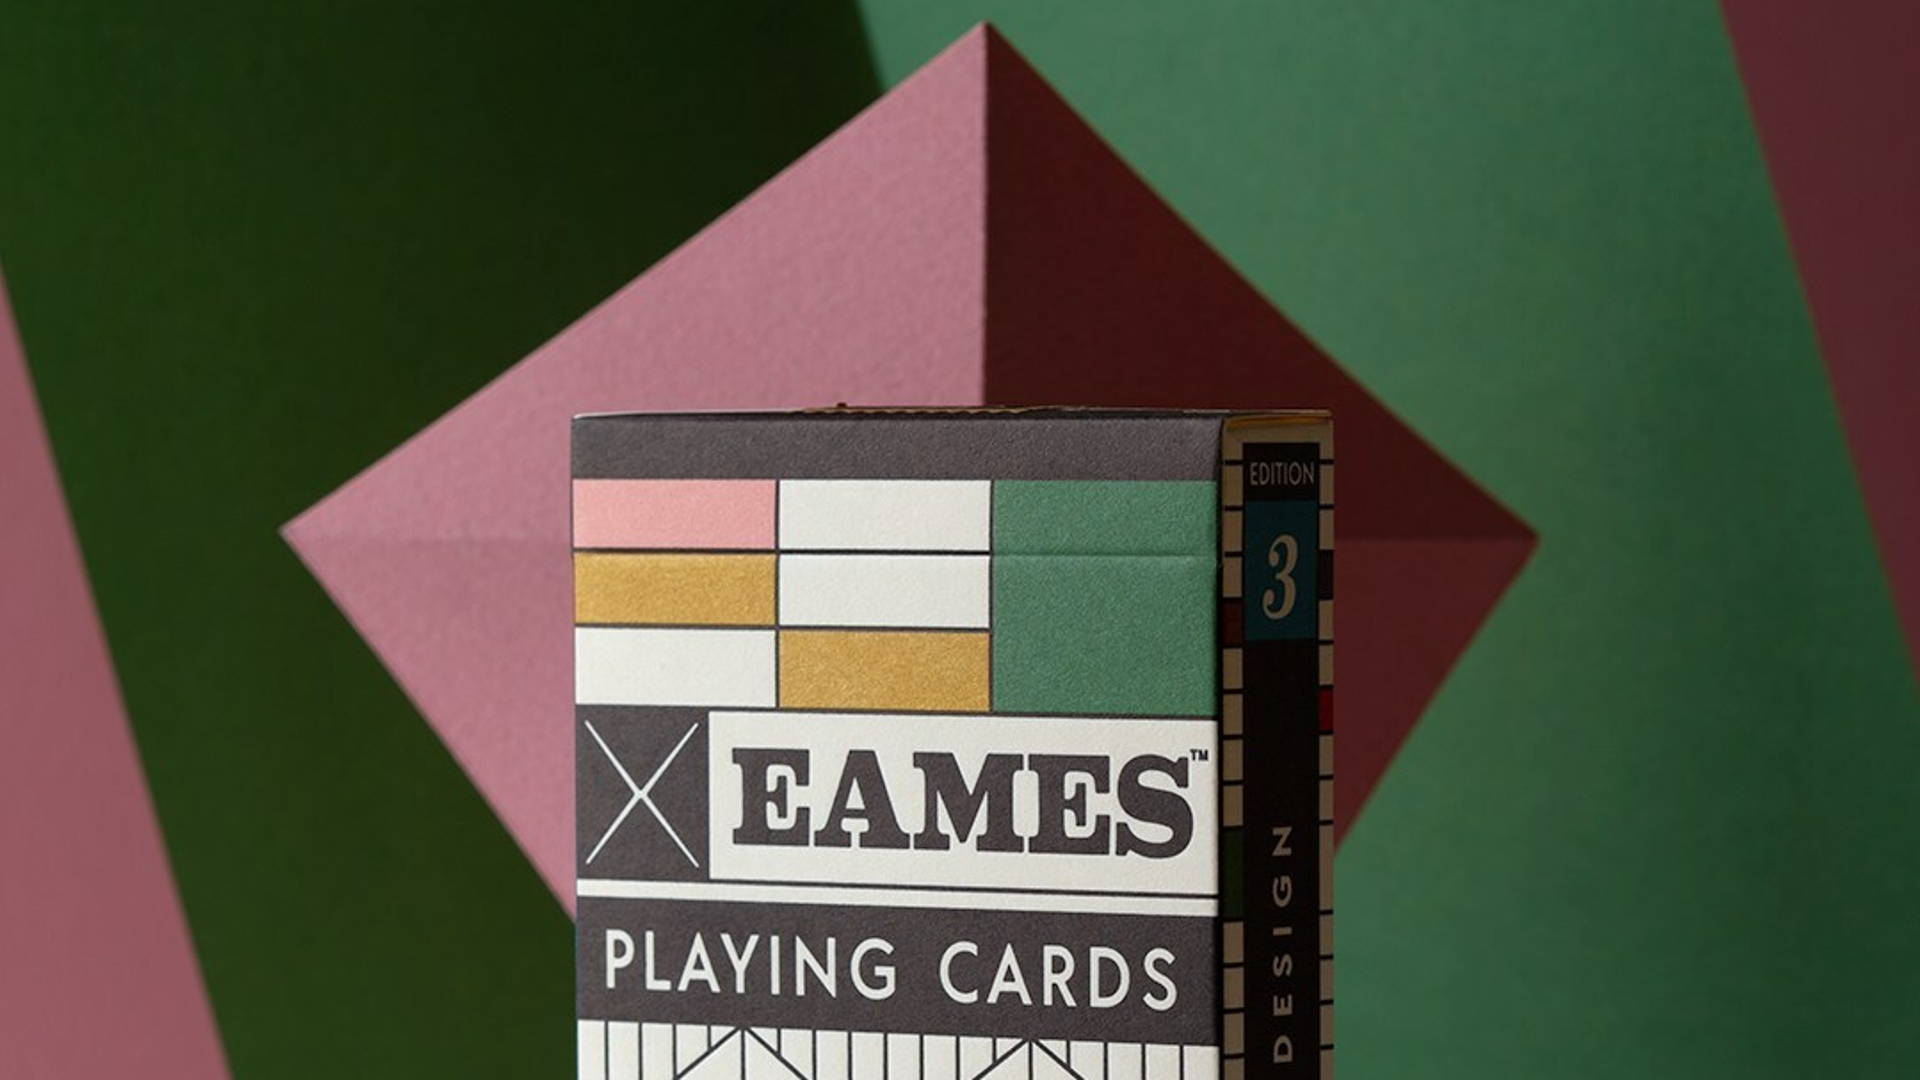 Featured image for Art of Play Designs Exclusive Playing Cards With Eames Office For Pop-Up Exhibition At MoMA Design Store